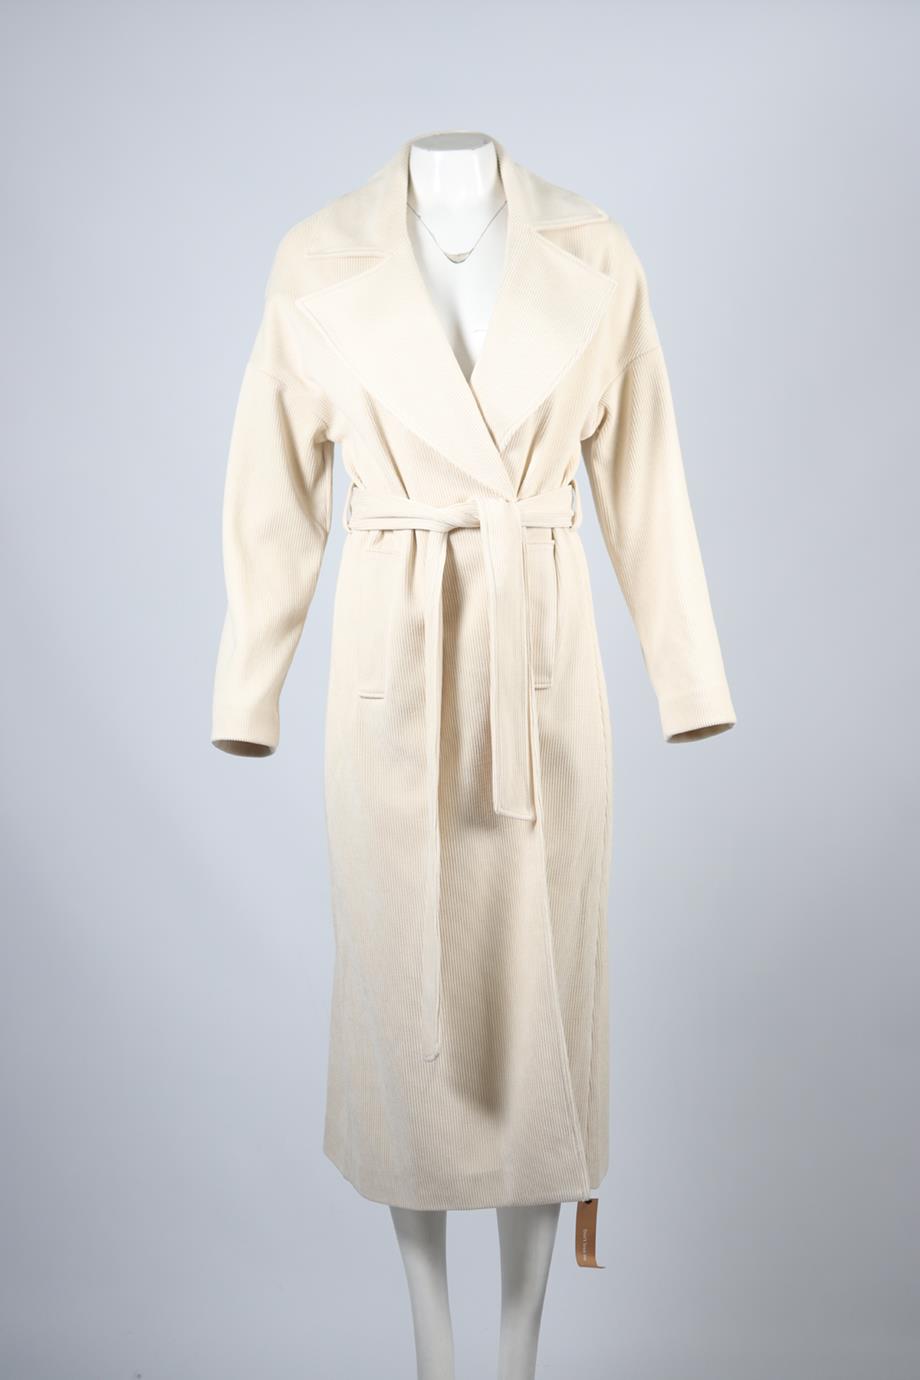 REFORMATION BELTED CORDUROY COAT SMALL